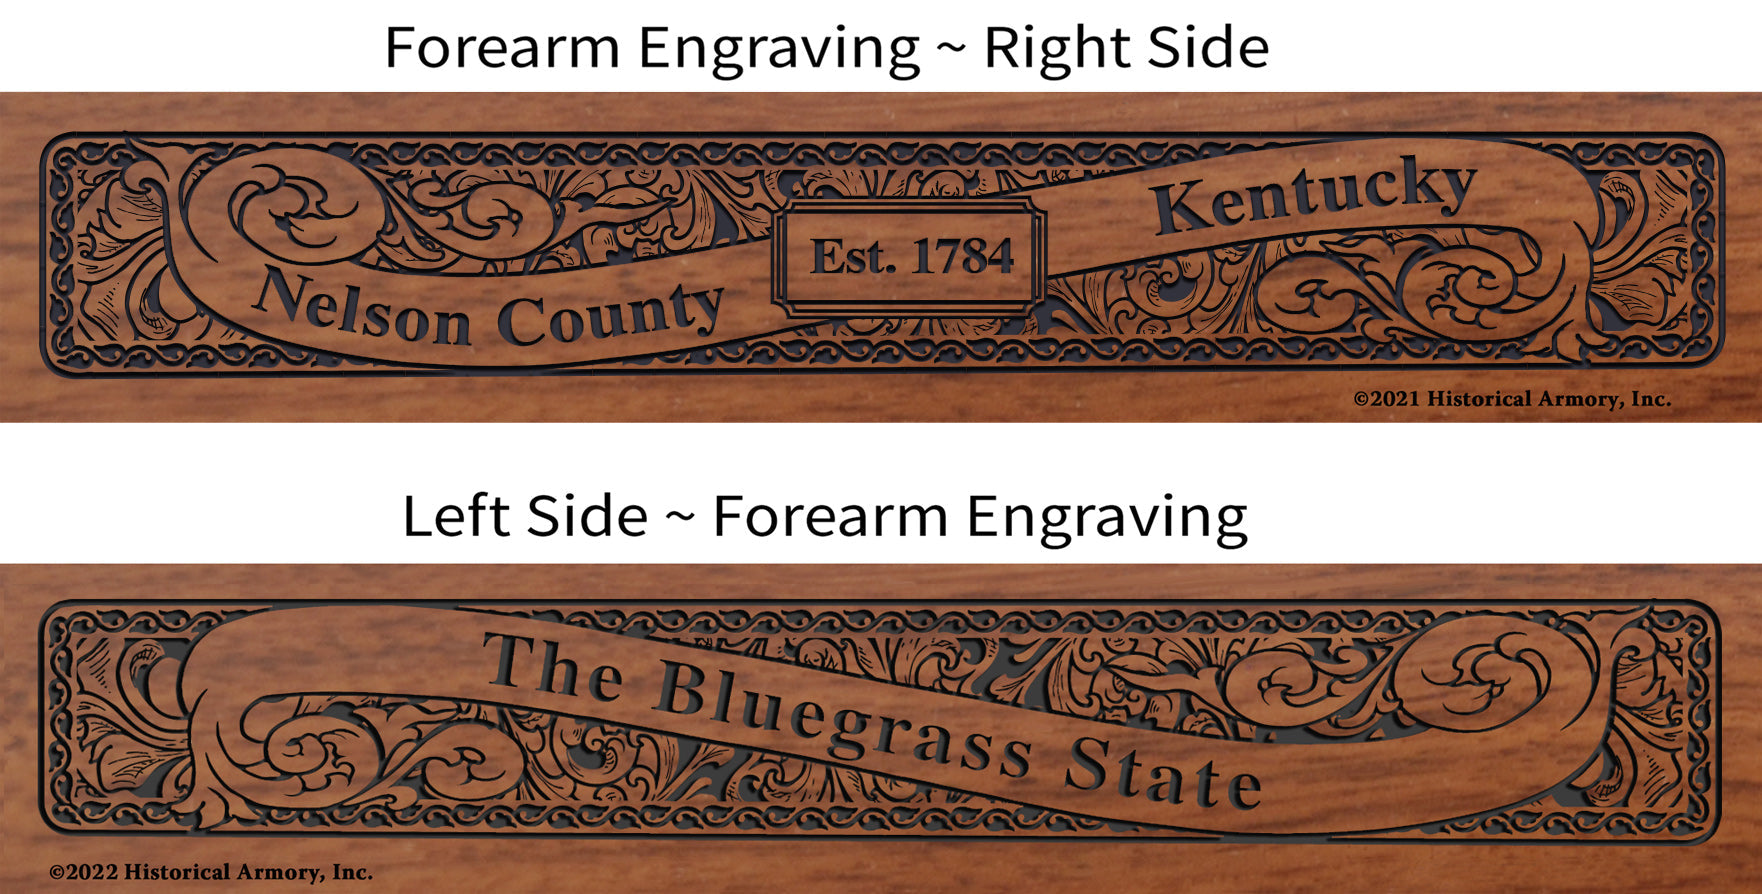 Nelson County Kentucky Engraved Rifle Forearm